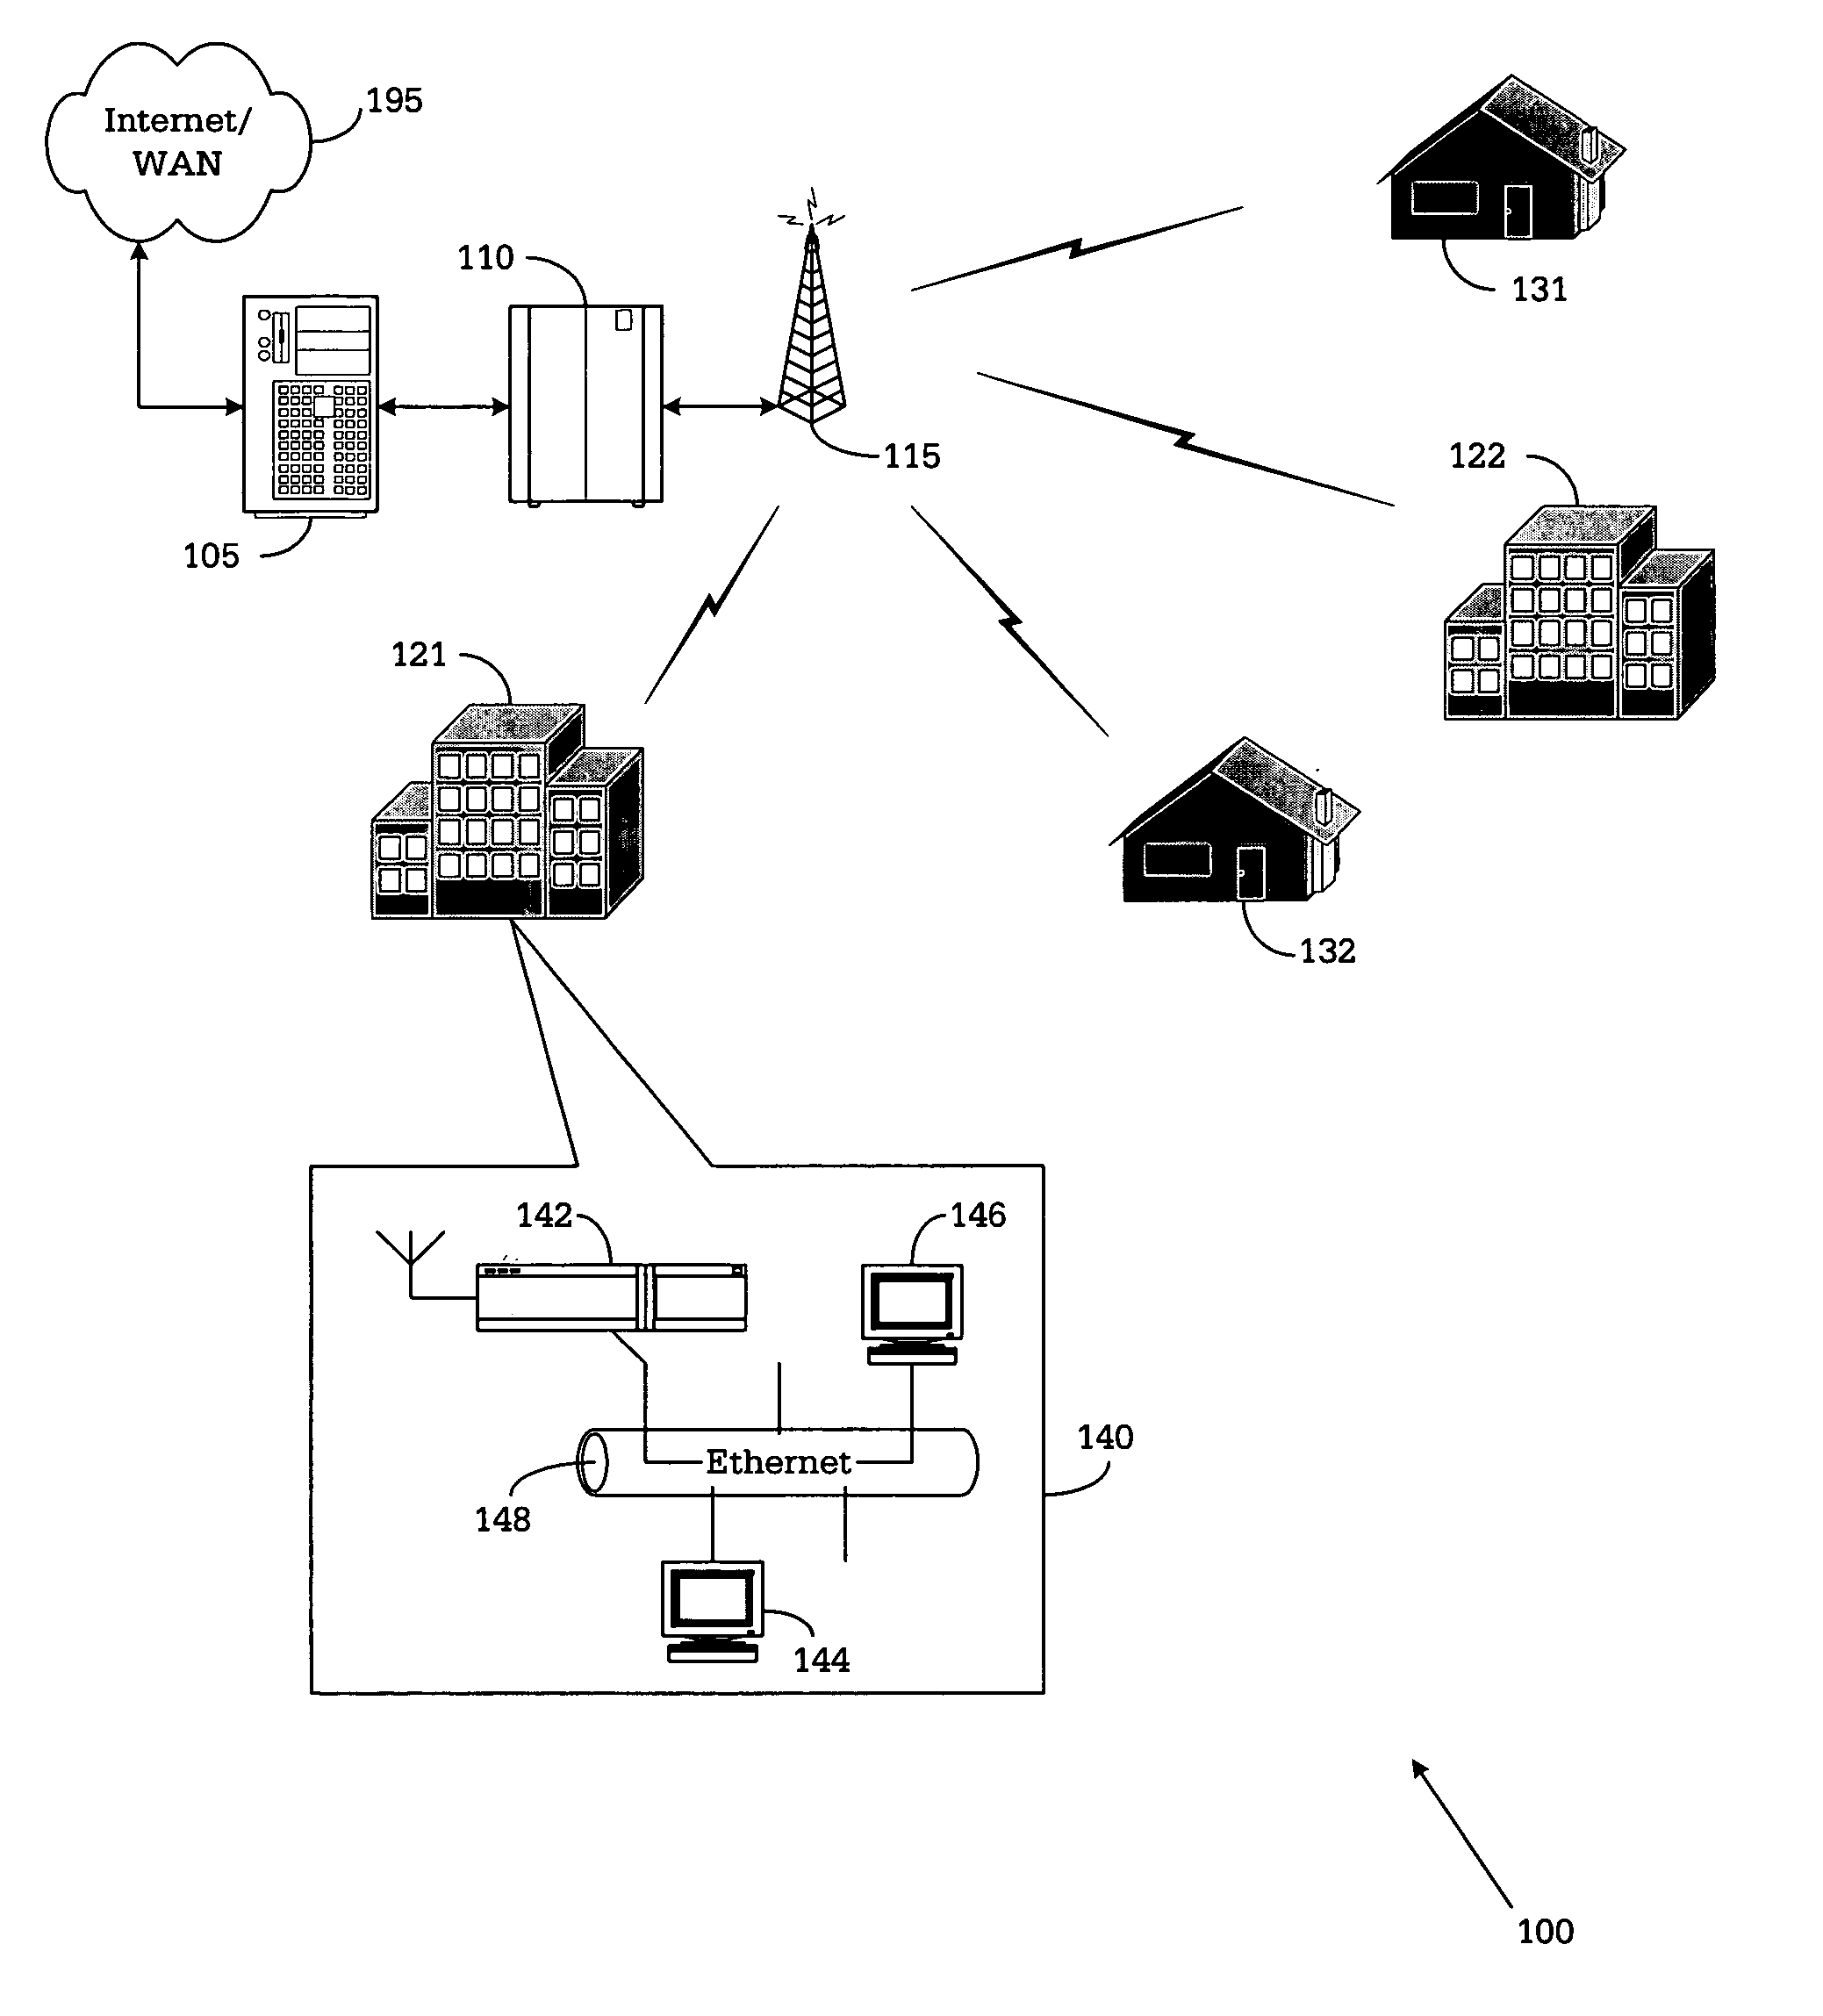 MAC layer protocol for a wireless DSL network